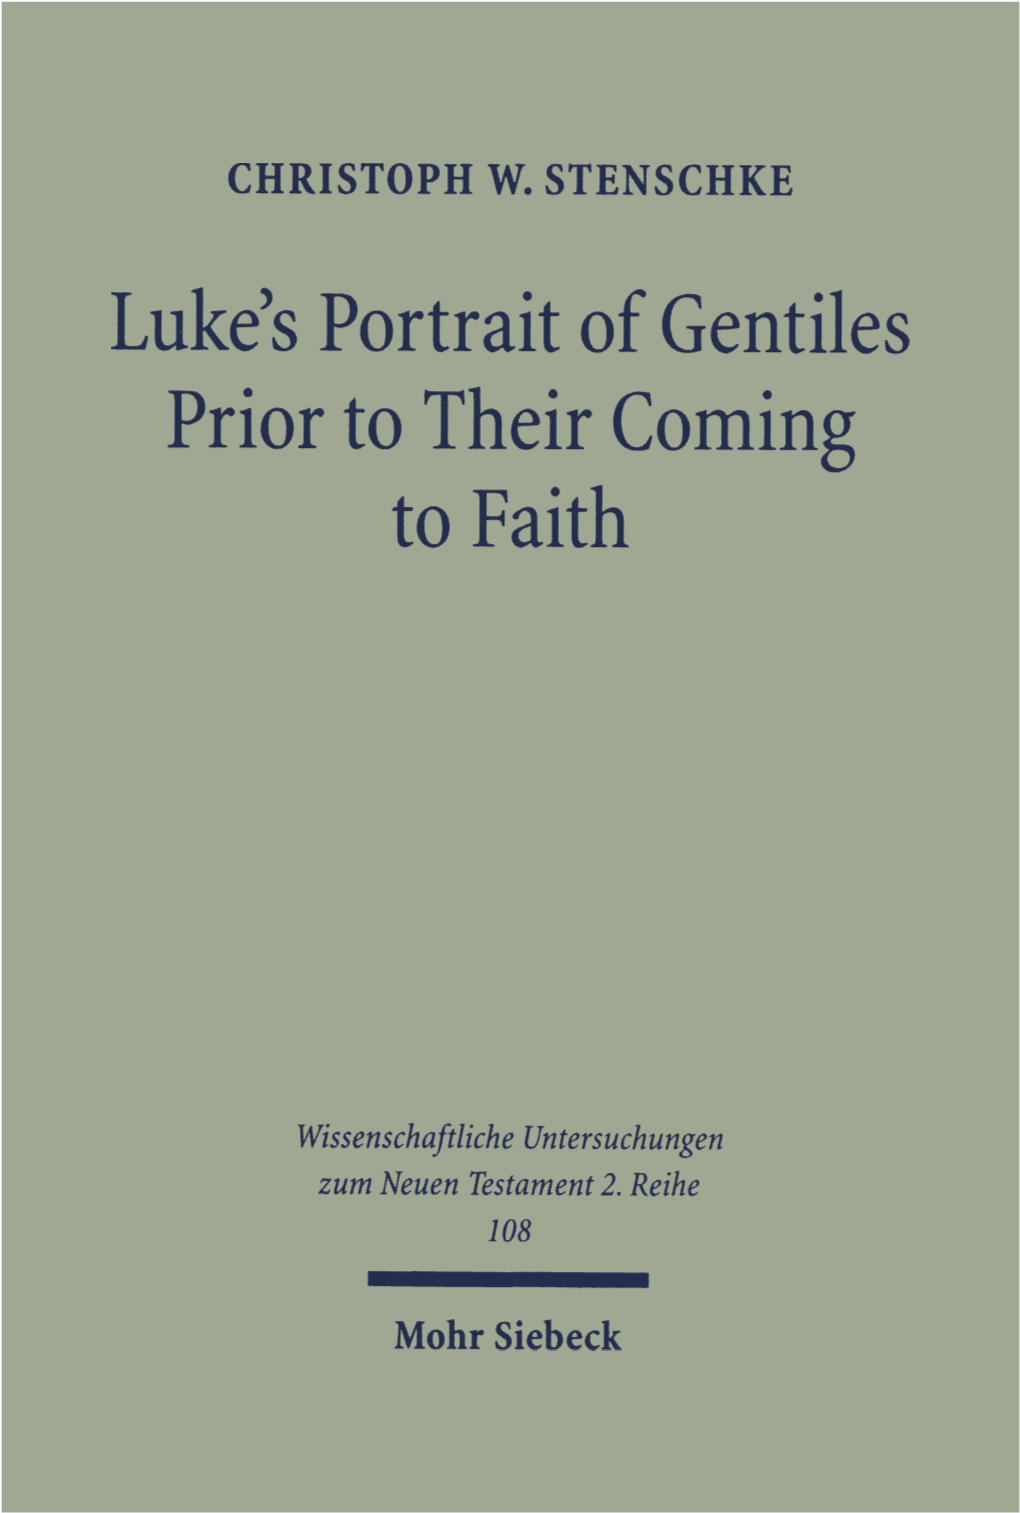 Luke's Portrait of Gentiles Prior to Their Coming to Faith